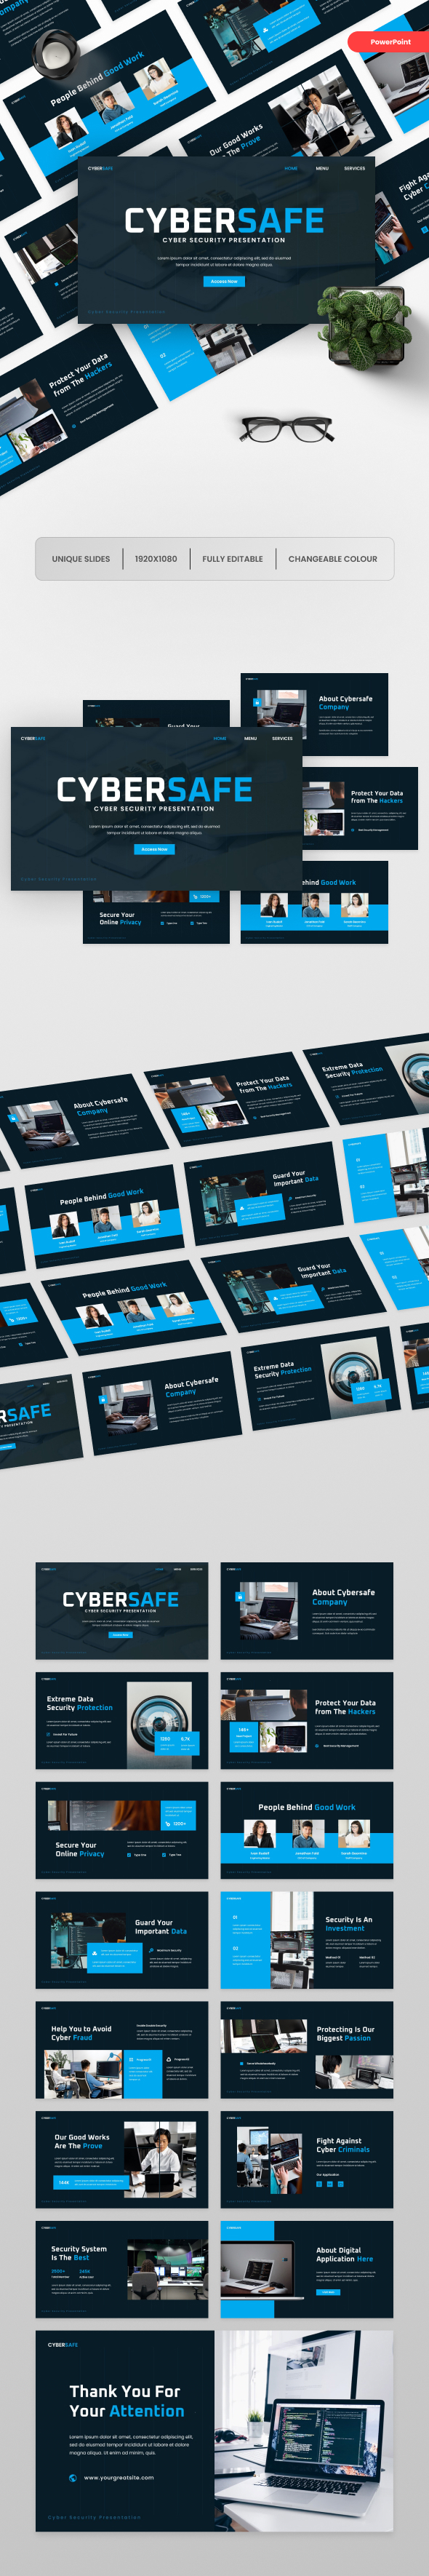 Cybersafe - Cyber Security PowerPoint Template